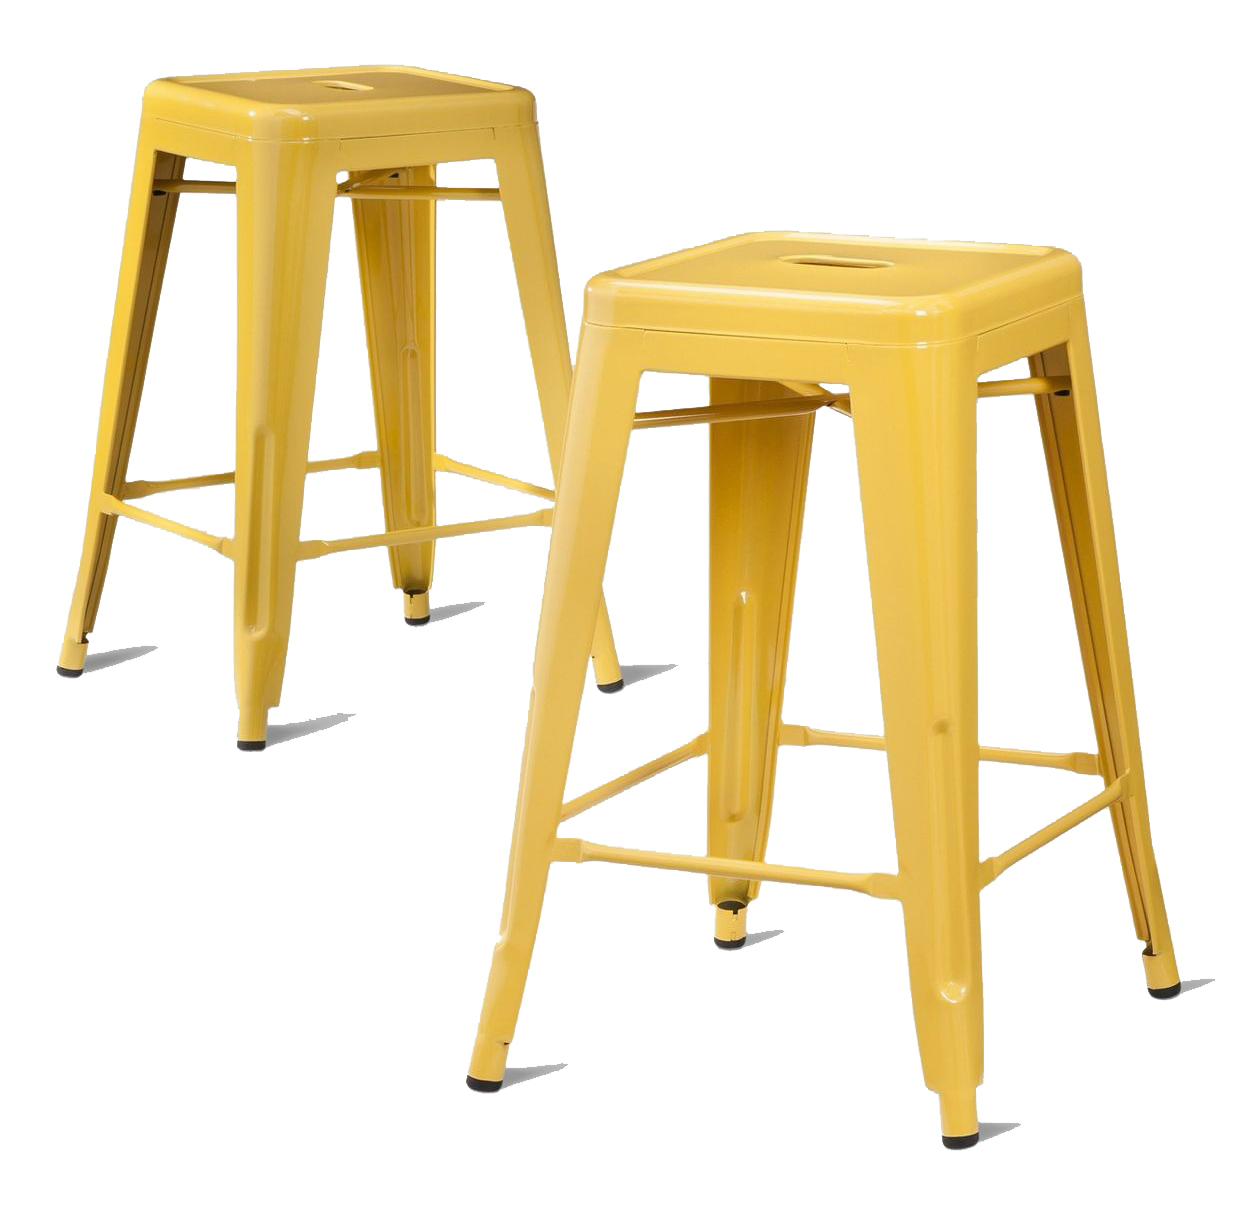 Set of 2 Threshold 24" Carlisle Metal Counter Height Barstools (Yellow or Mint Green) $68.75 at Target + 2.5% Slickdeals Cashback (PC Req'd) + Free S/H